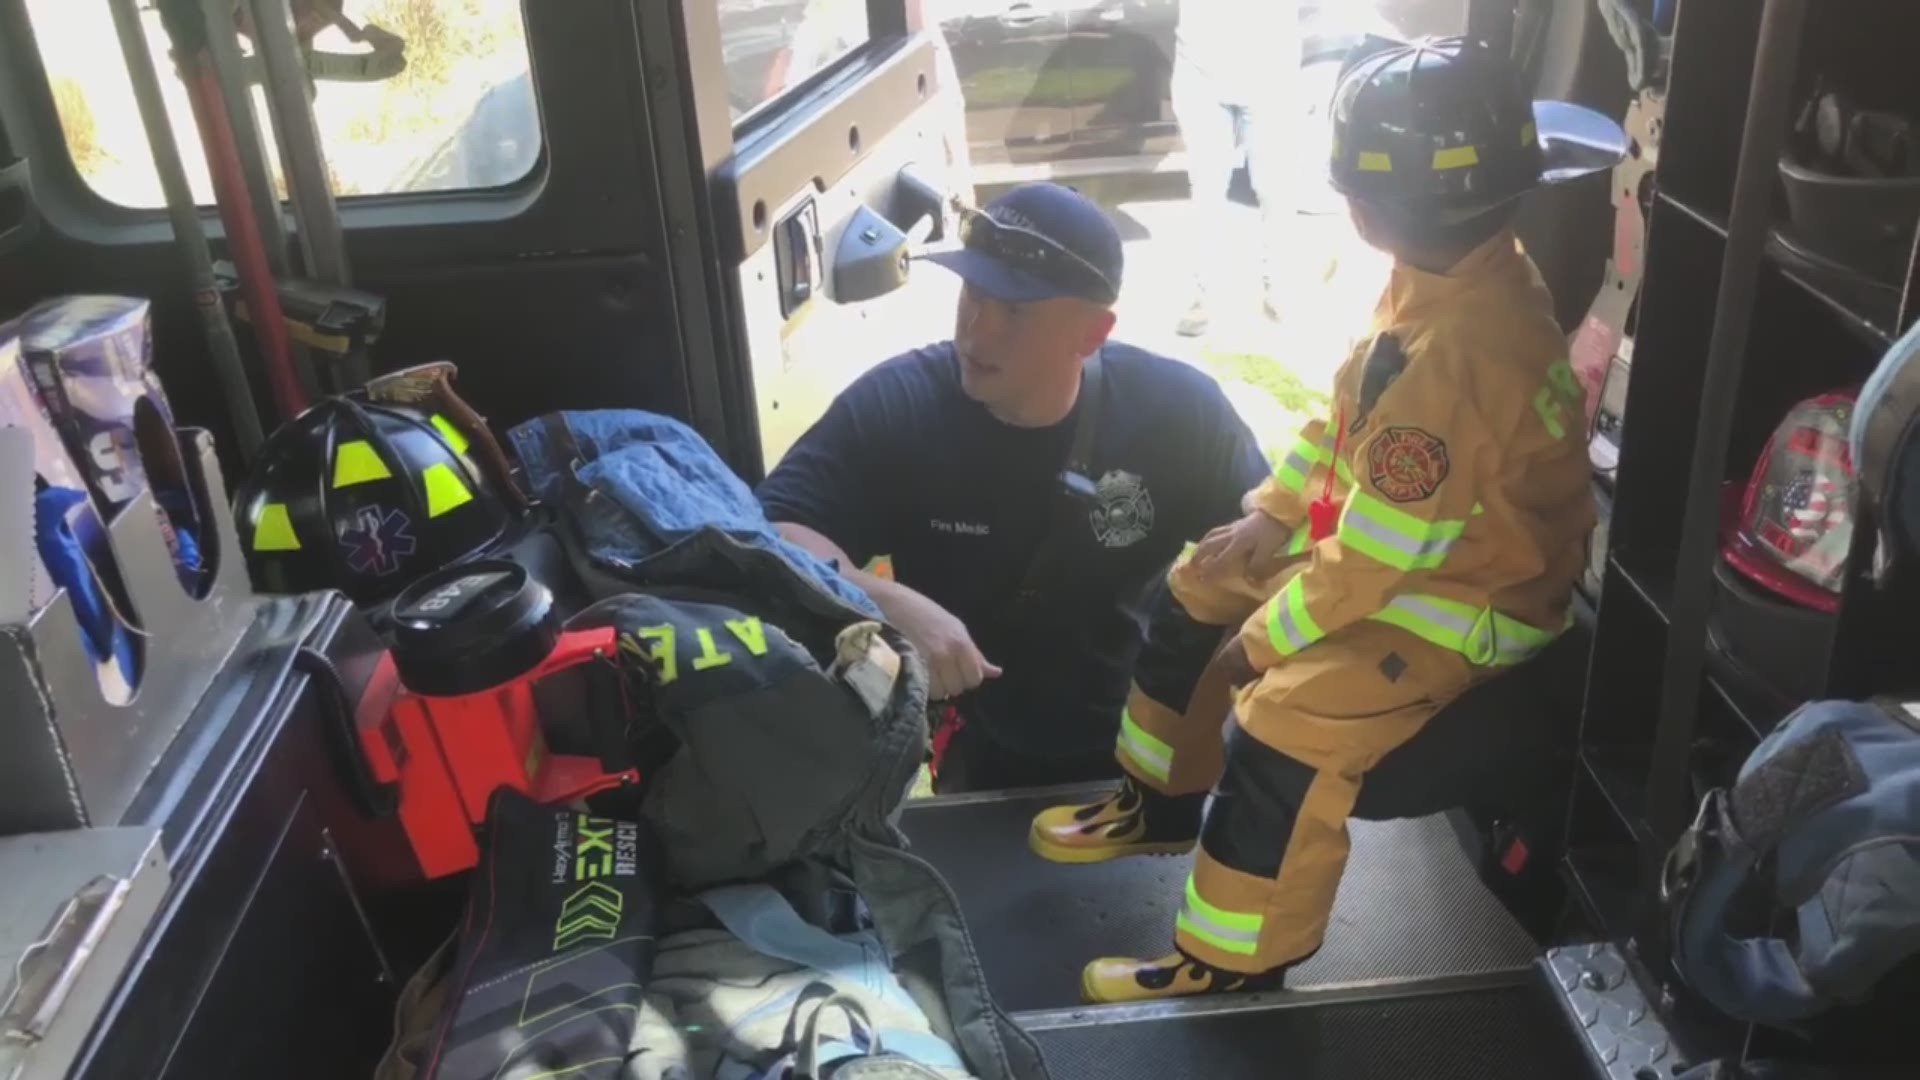 When Clearwater firefighters heard that 5-year-old Santiago Hernandez recently had a birthday and adores firefighters, they knew they had to make a call for service